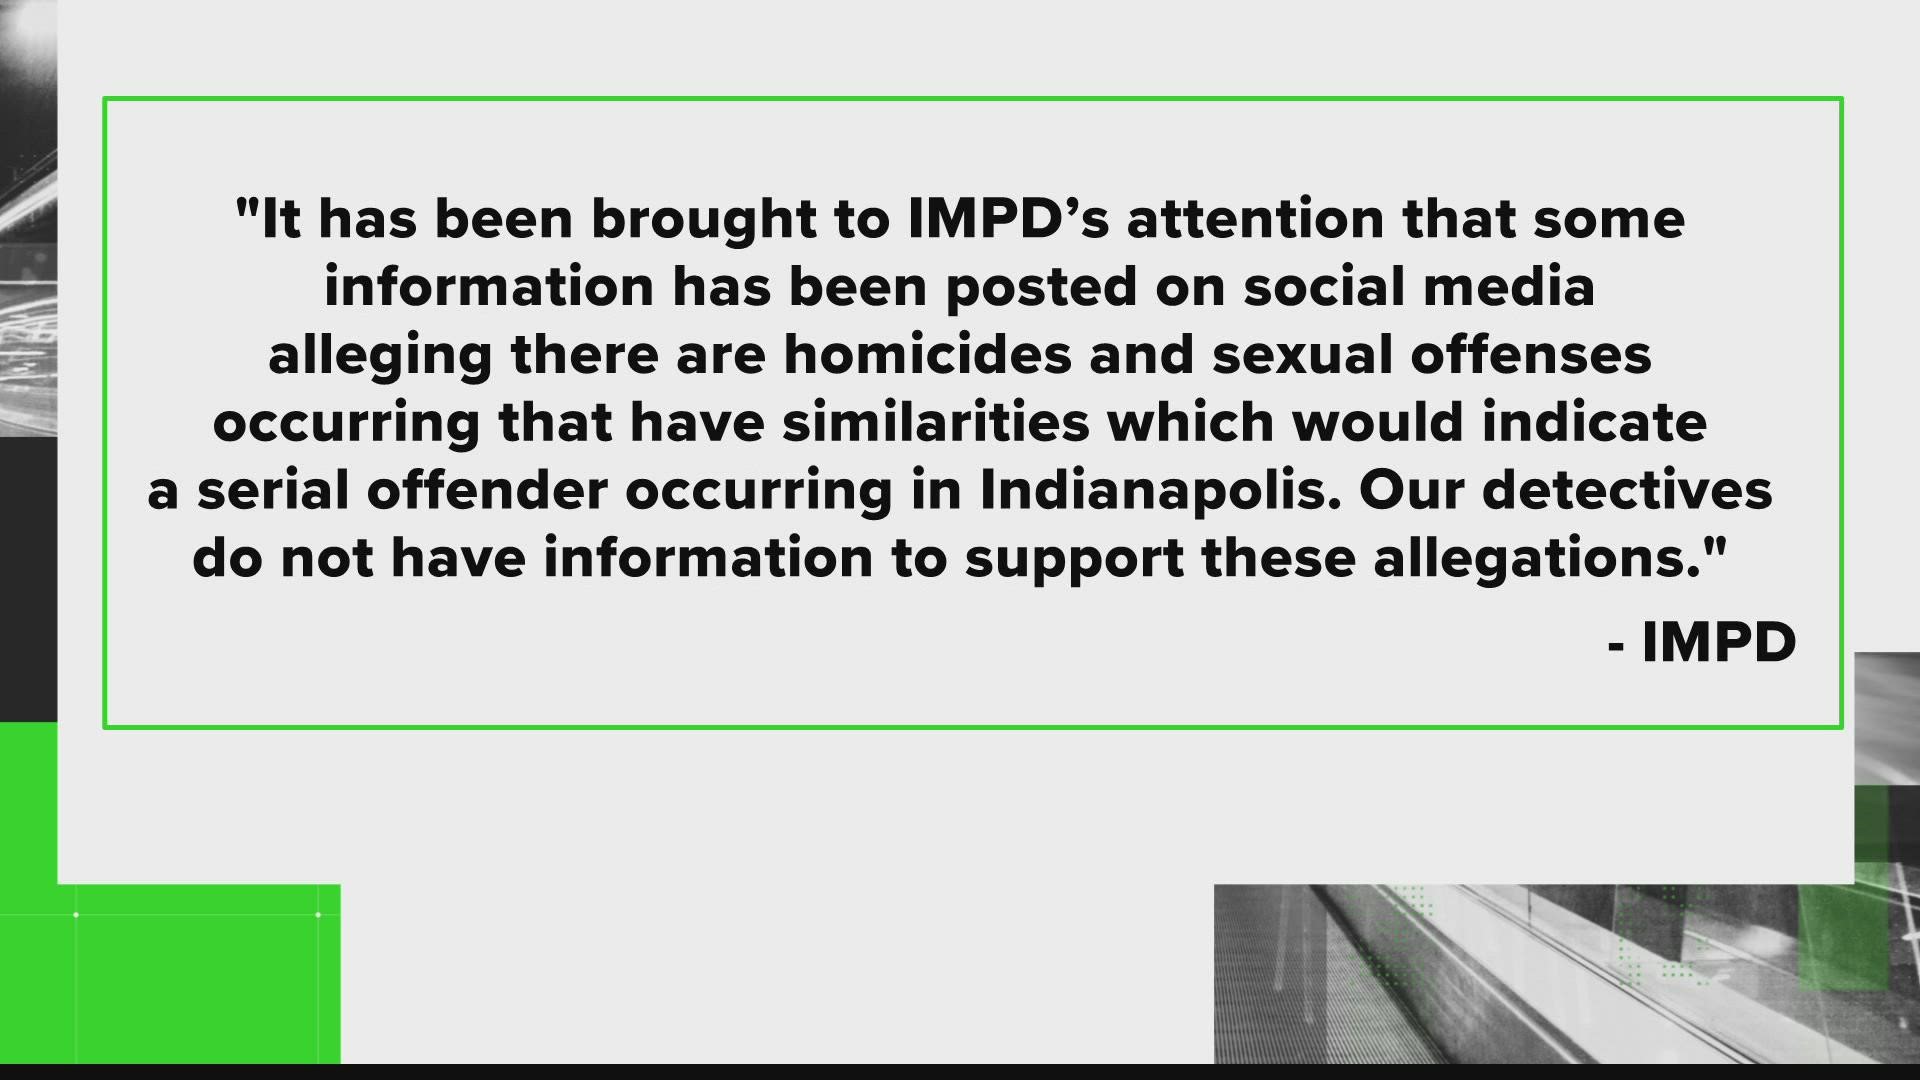 IMPD says they have no information to support social media allegations about a serial killer in Indianapolis.